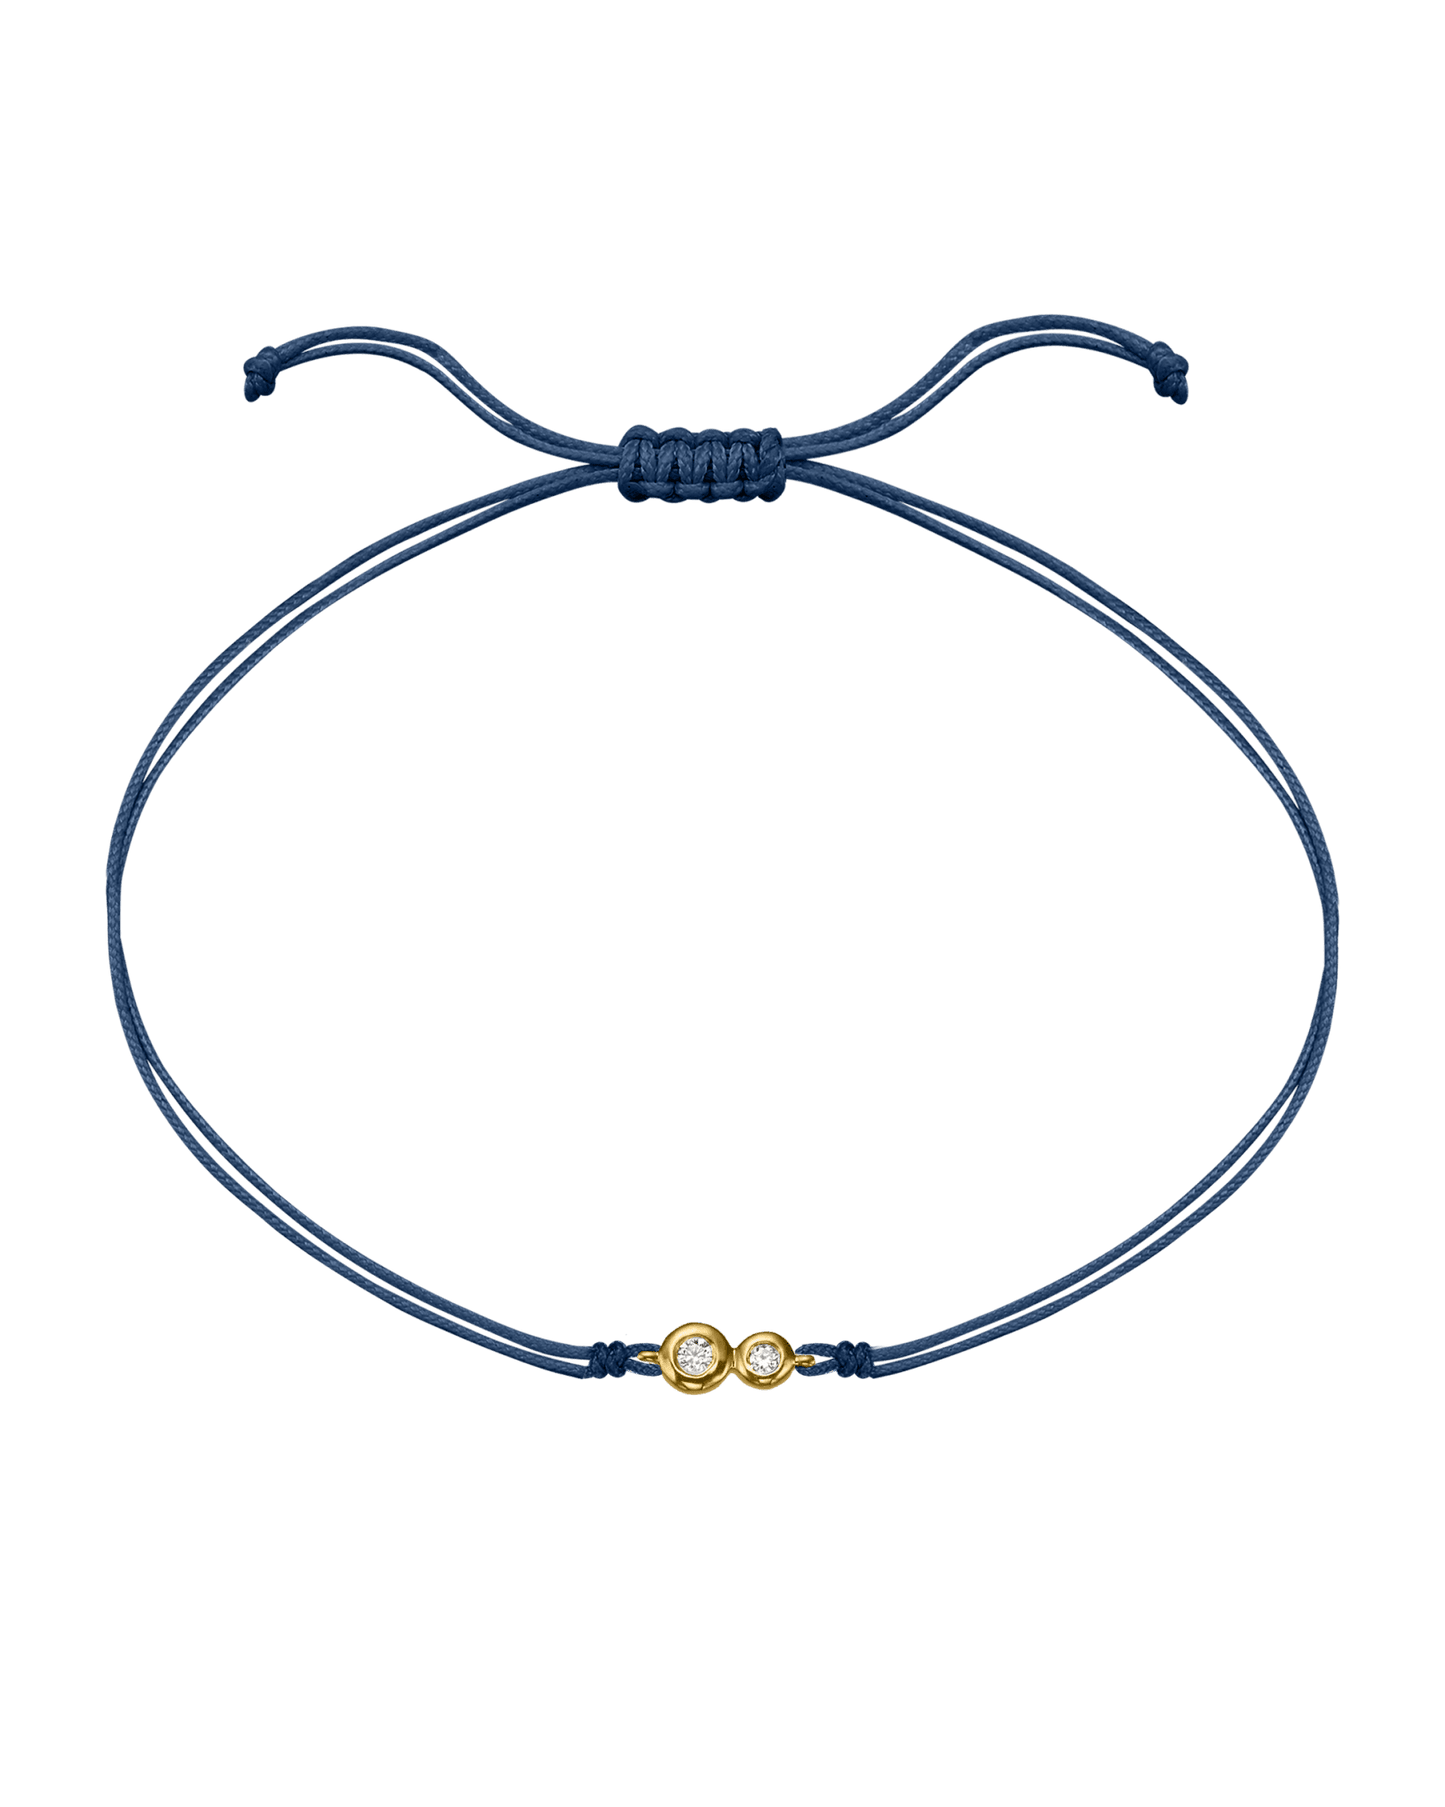 The Two of us Diamond String of love - 14K Yellow Gold Bracelet 14K Solid Gold Indigo 